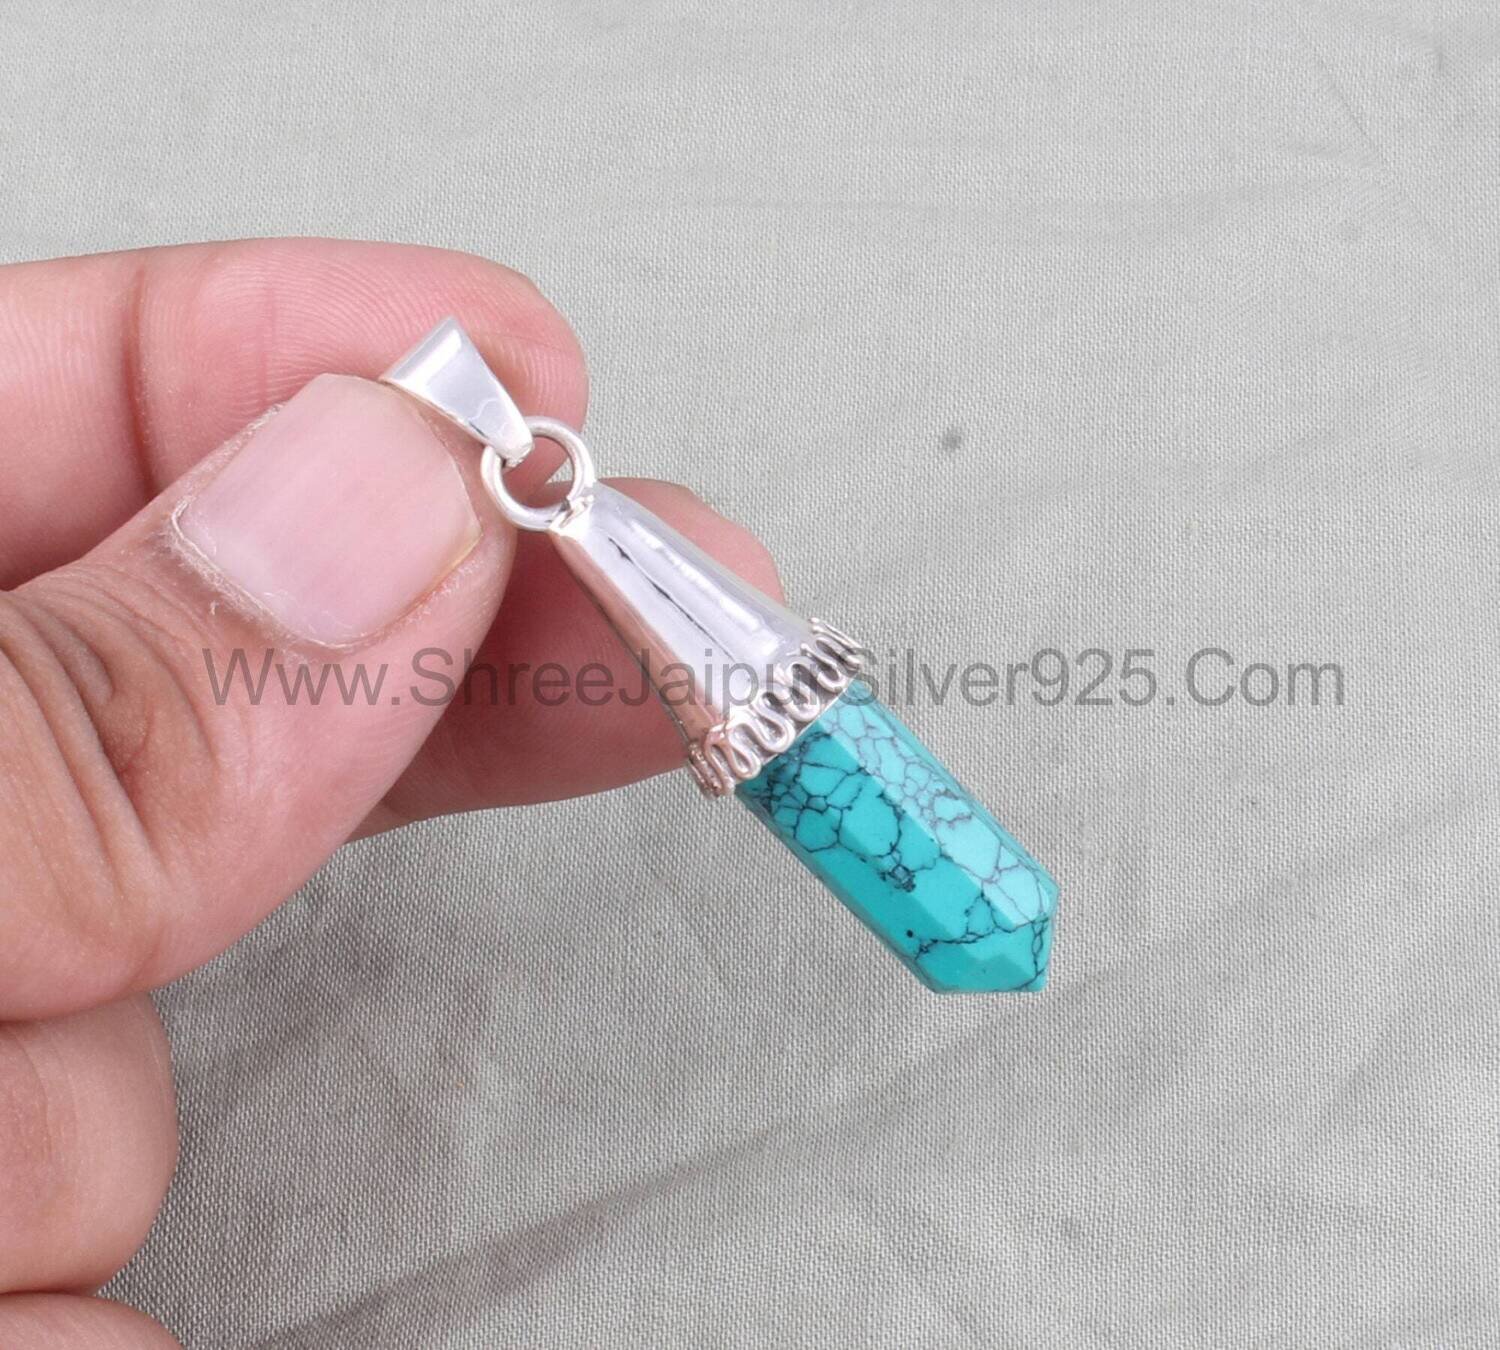 Tibetan Turquoise Pencil Solid 925 Sterling Silver Necklace Pendant, Handmade Pencil Stone Silver Pendant For Wedding Anniversary Gift Idea